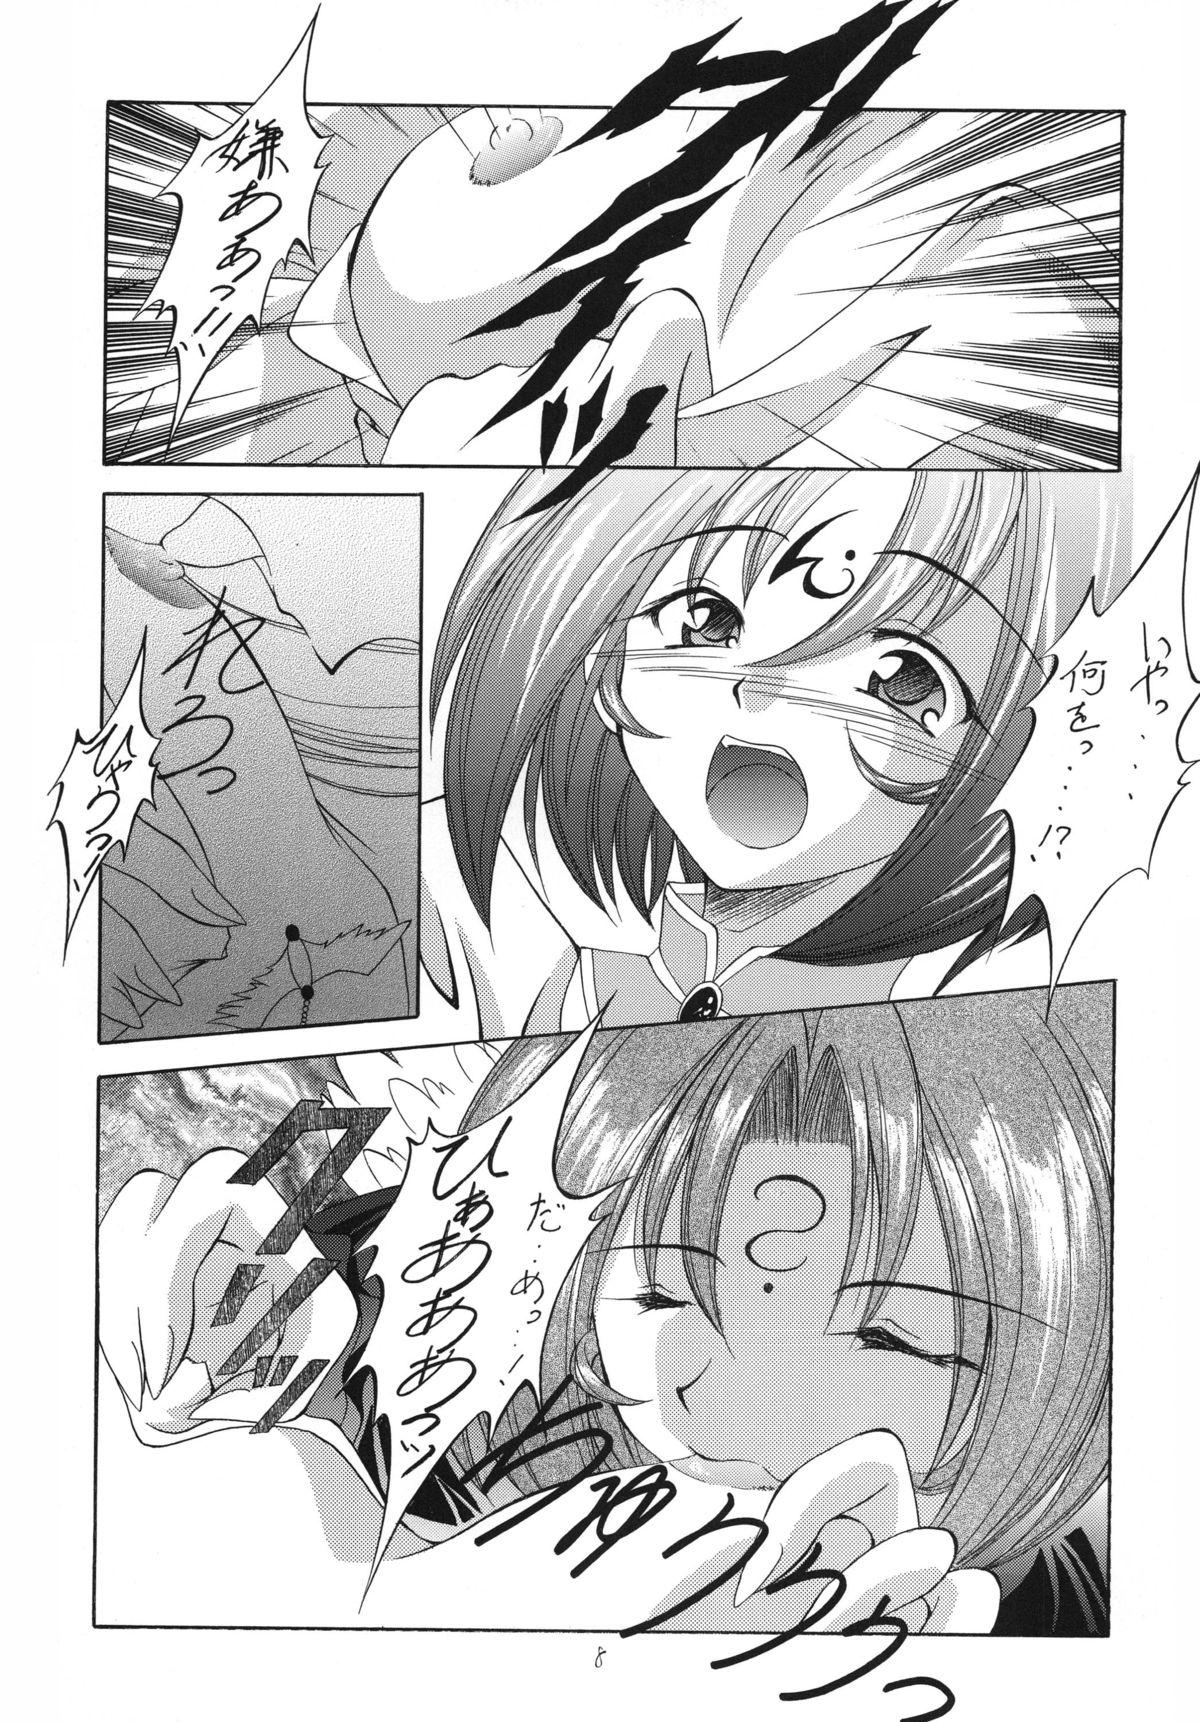 Adorable Kyoei to Haitoku - .hacksign Double - Page 8